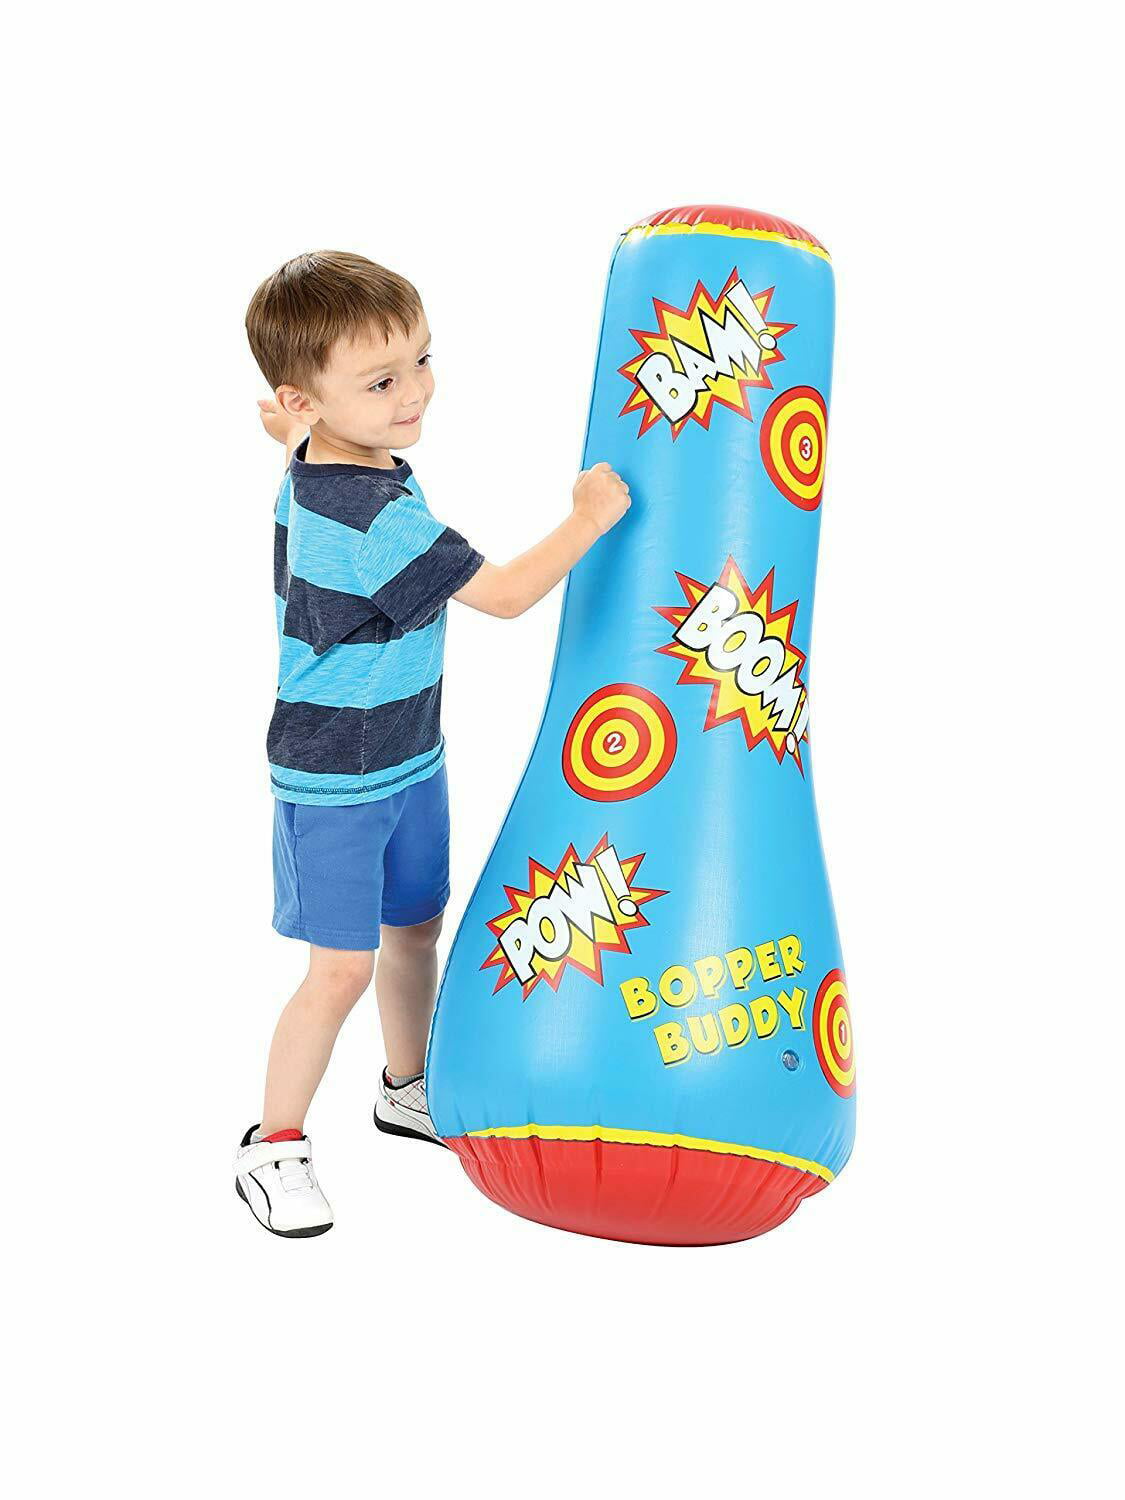 Football Gift for Kids ZaxiDeel Inflatable Punching Bag 140cm Double-Sided Premium Bop Bag Inflatable Toys Premium Bop Bag/Toss Target Game 